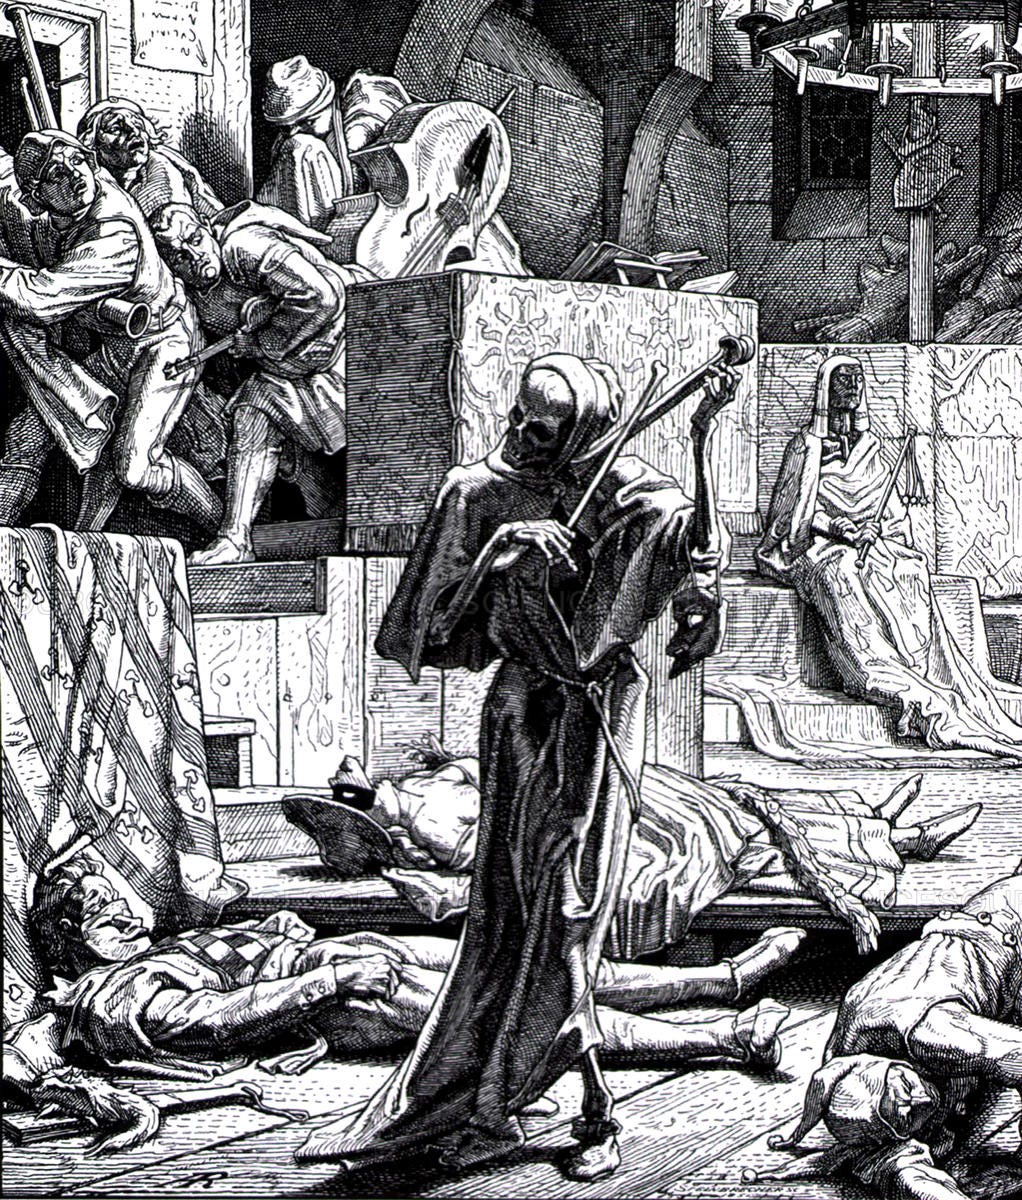 A skeleton in a cloak plays the violin as people on a higher building crouch in fear. In black and white.